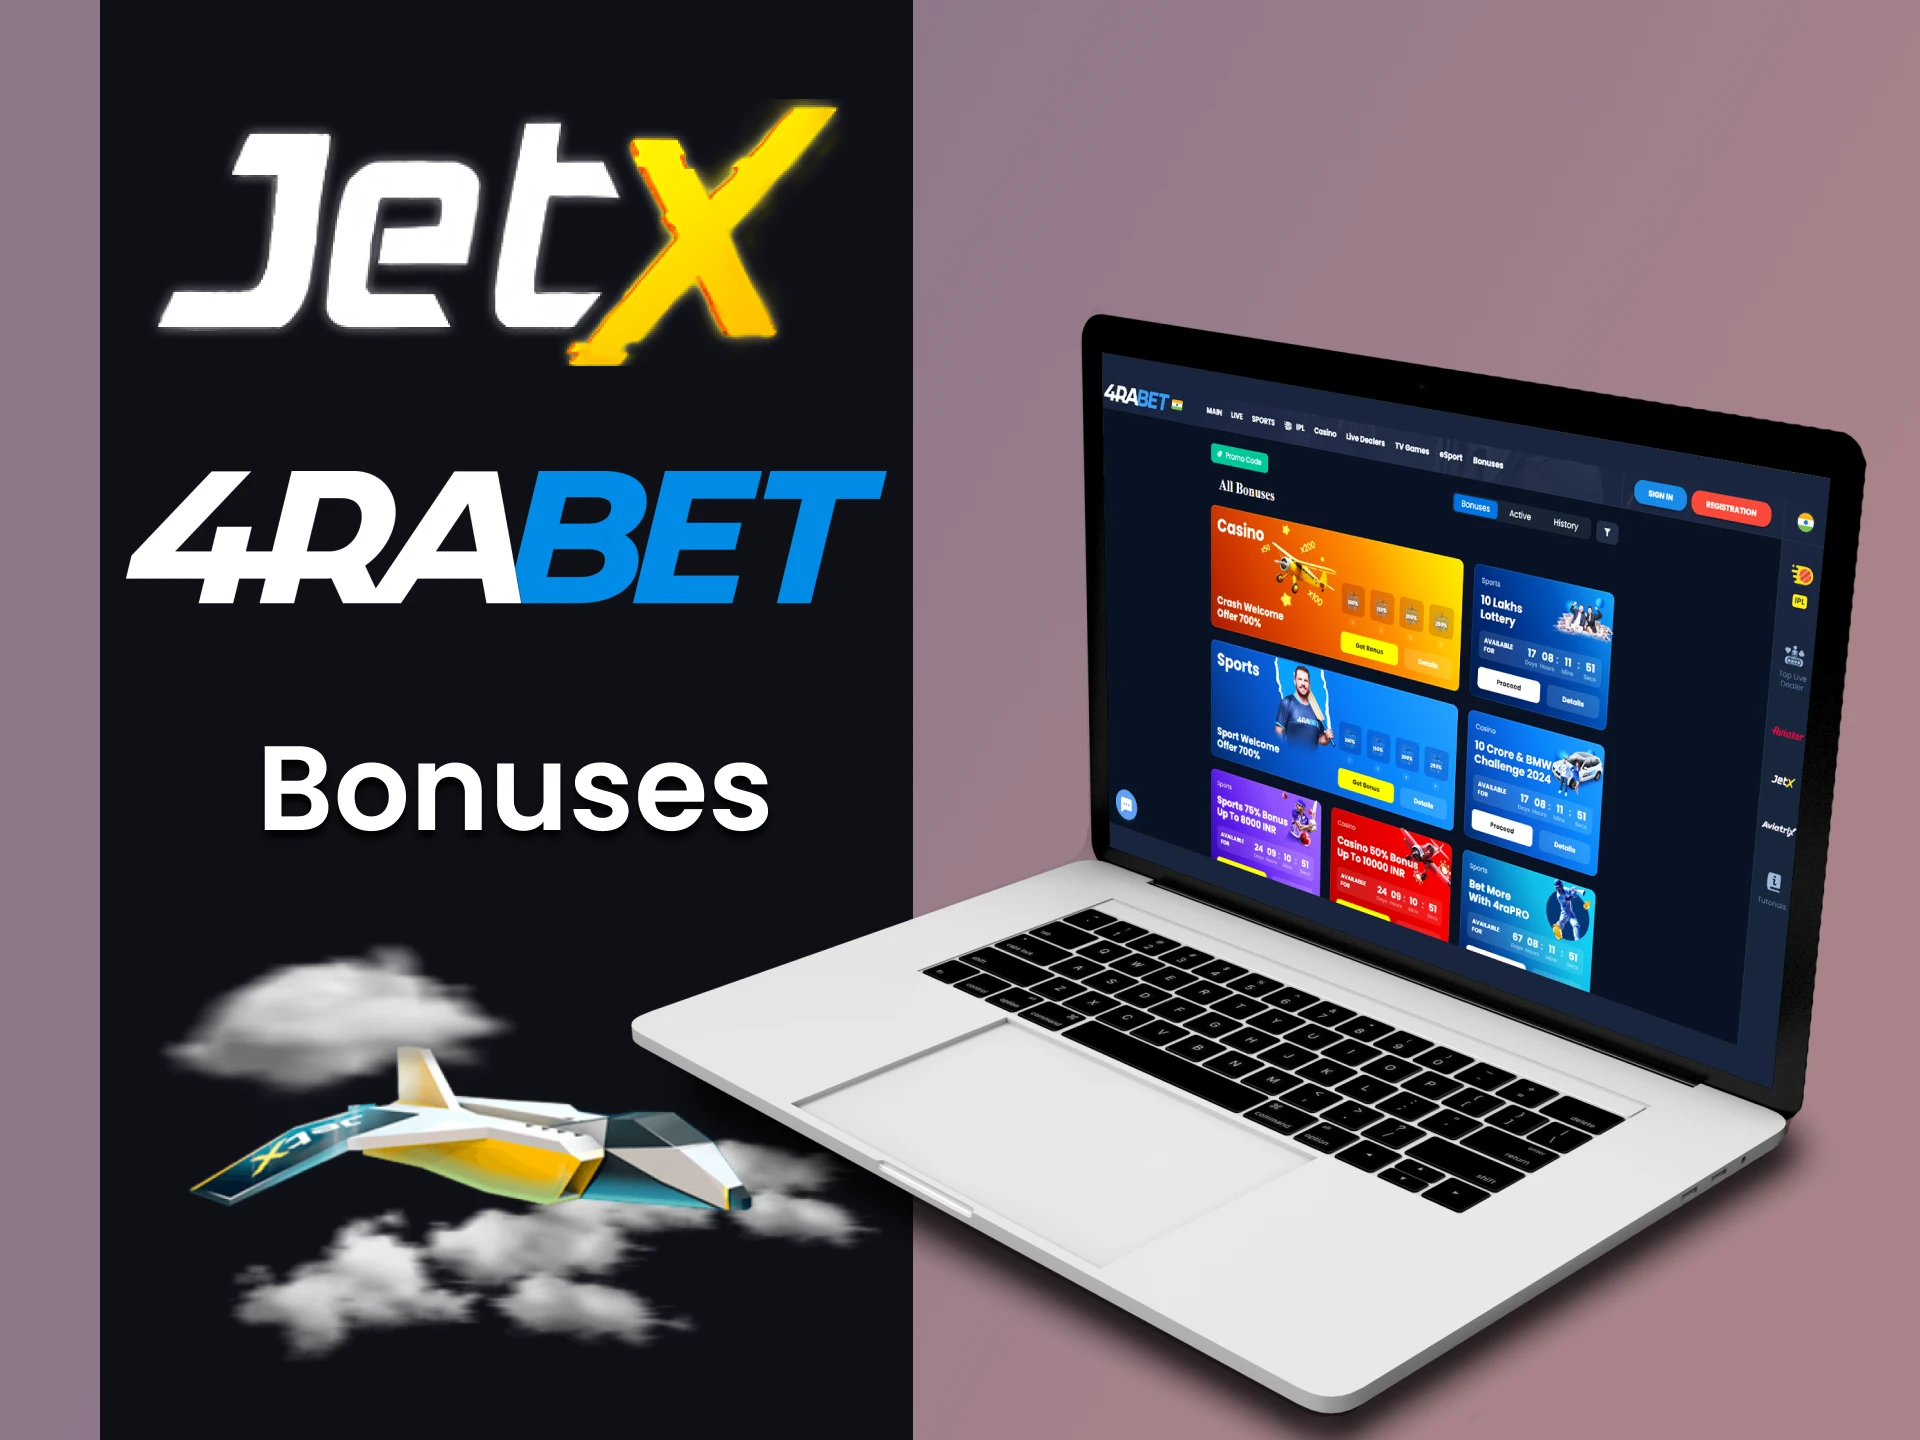 We will tell you about bonuses for JetX from 4rabet.